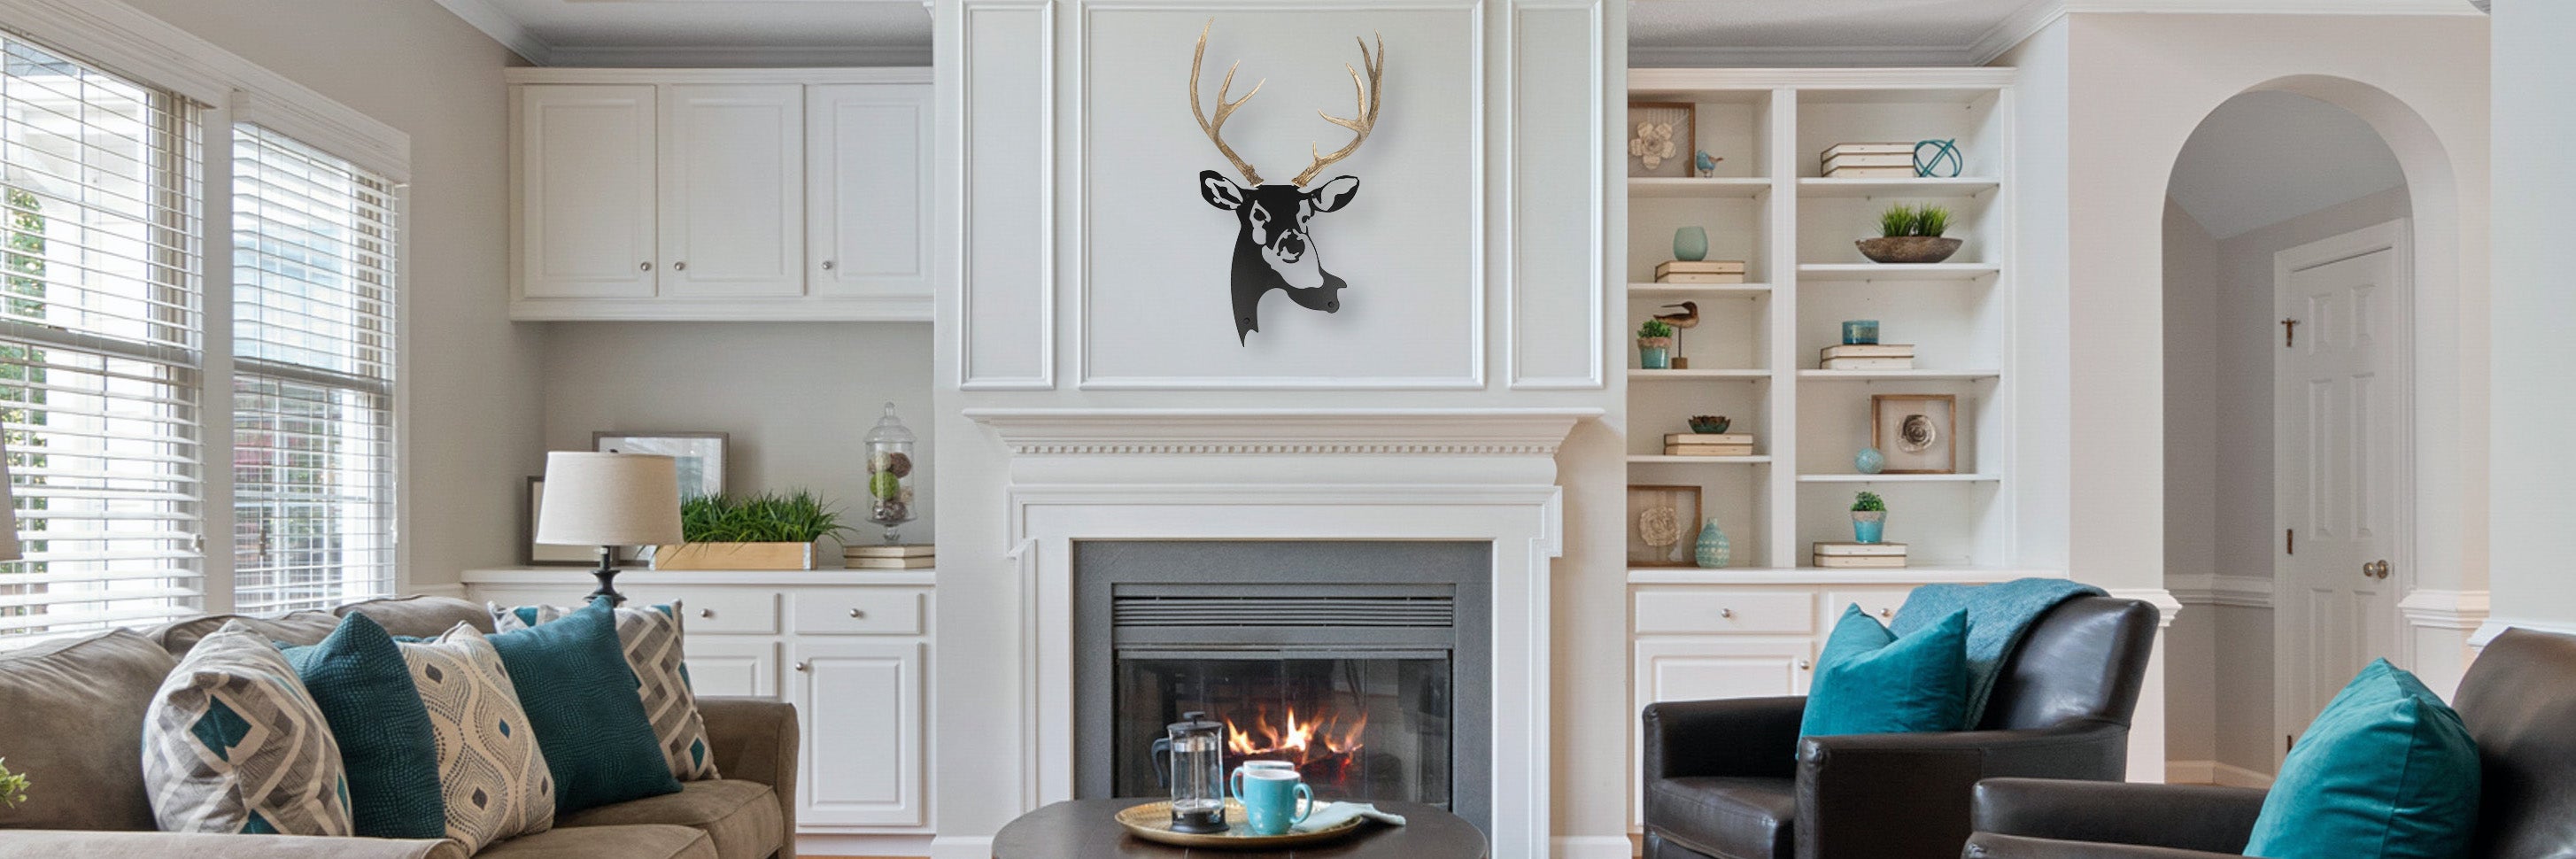 A image of an antler & metal wall decor by Dekor Nature in a living room above a fireplace